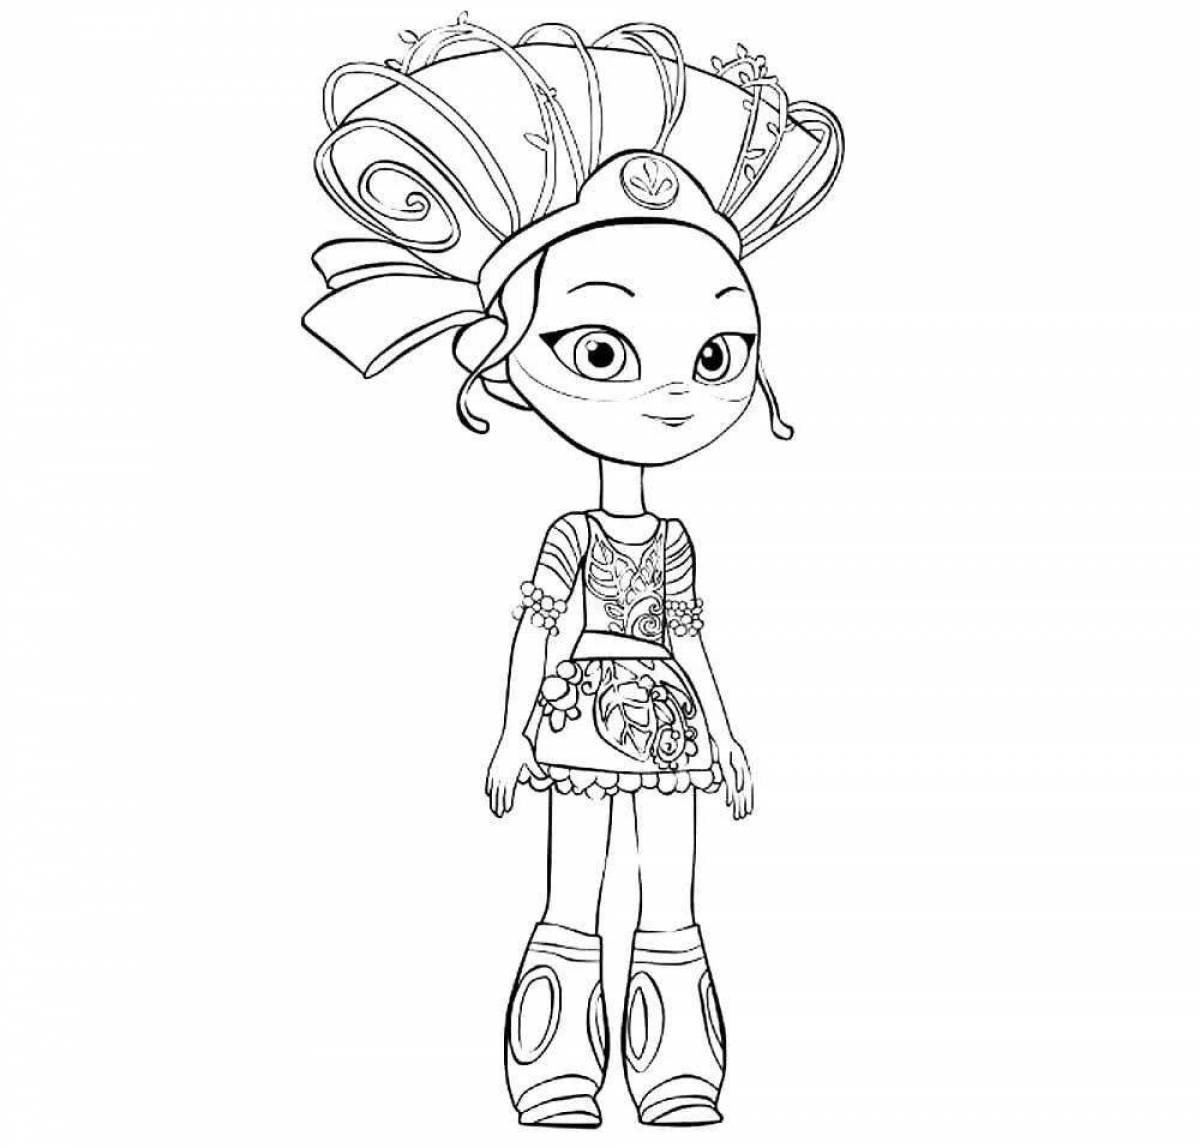 Fairy Patrol deluxe coloring page